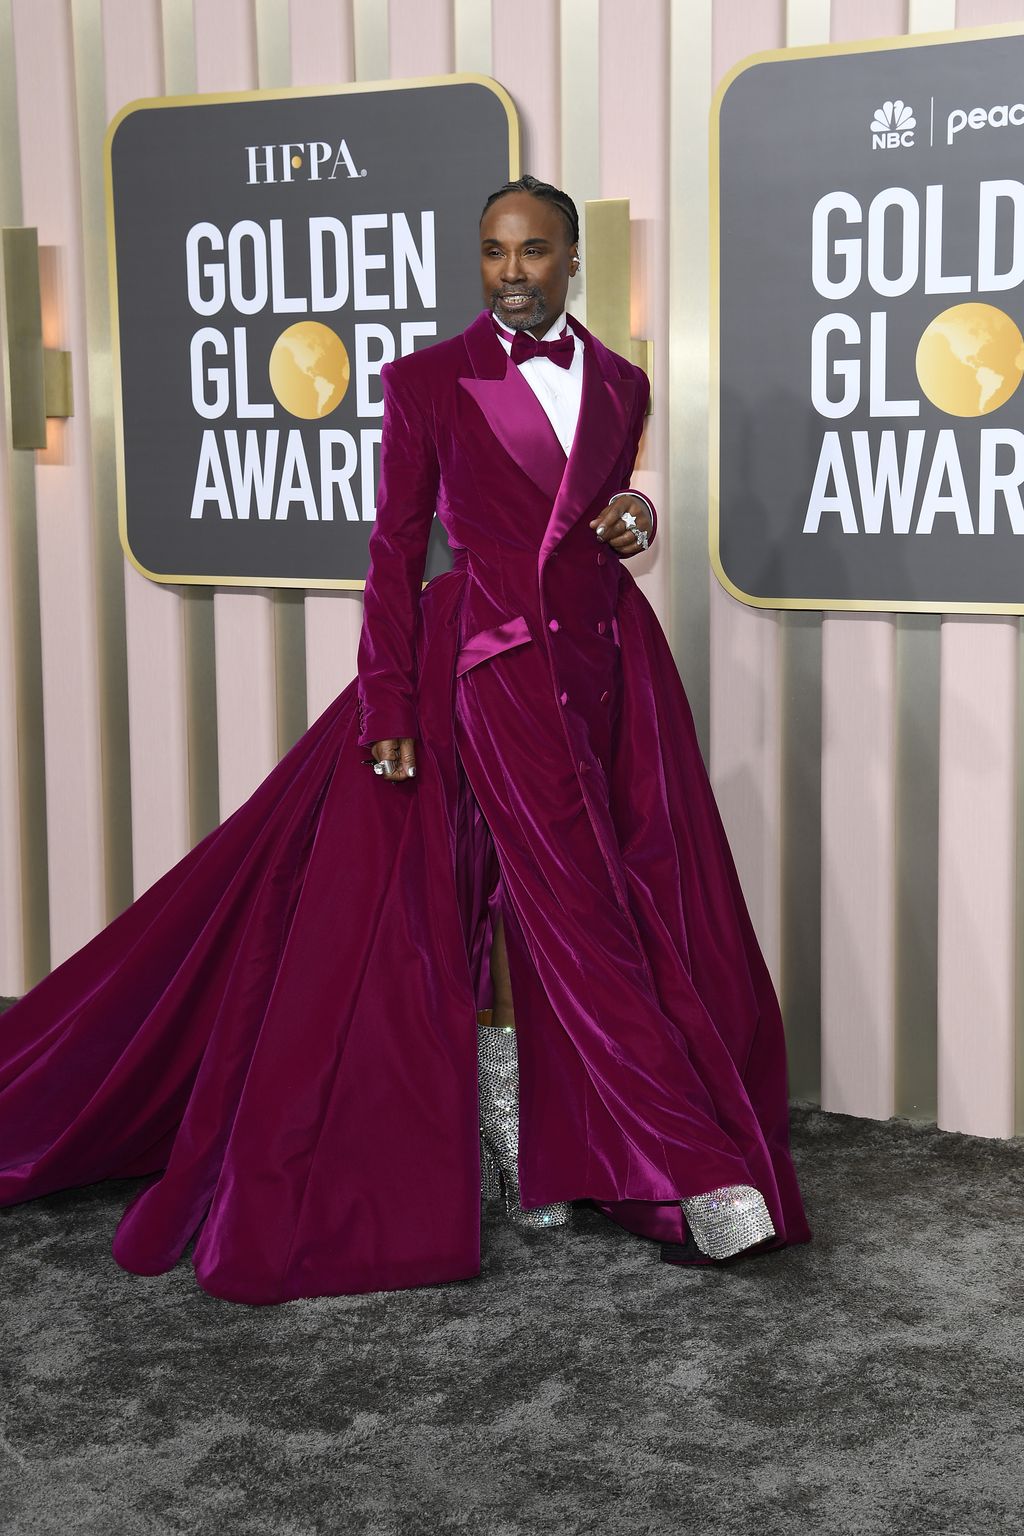 BEVERLY HILLS, CALIFORNIA - JANUARY 10: 80th Annual GOLDEN GLOBE AWARDS -- Pictured: Billy Porter arrives to the 80th Annual Golden Globe Awards held at the Beverly Hilton Hotel on January 10, 2023 in Beverly Hills, California. --  (Photo by Kevork Djansezian/NBC via Getty Images)